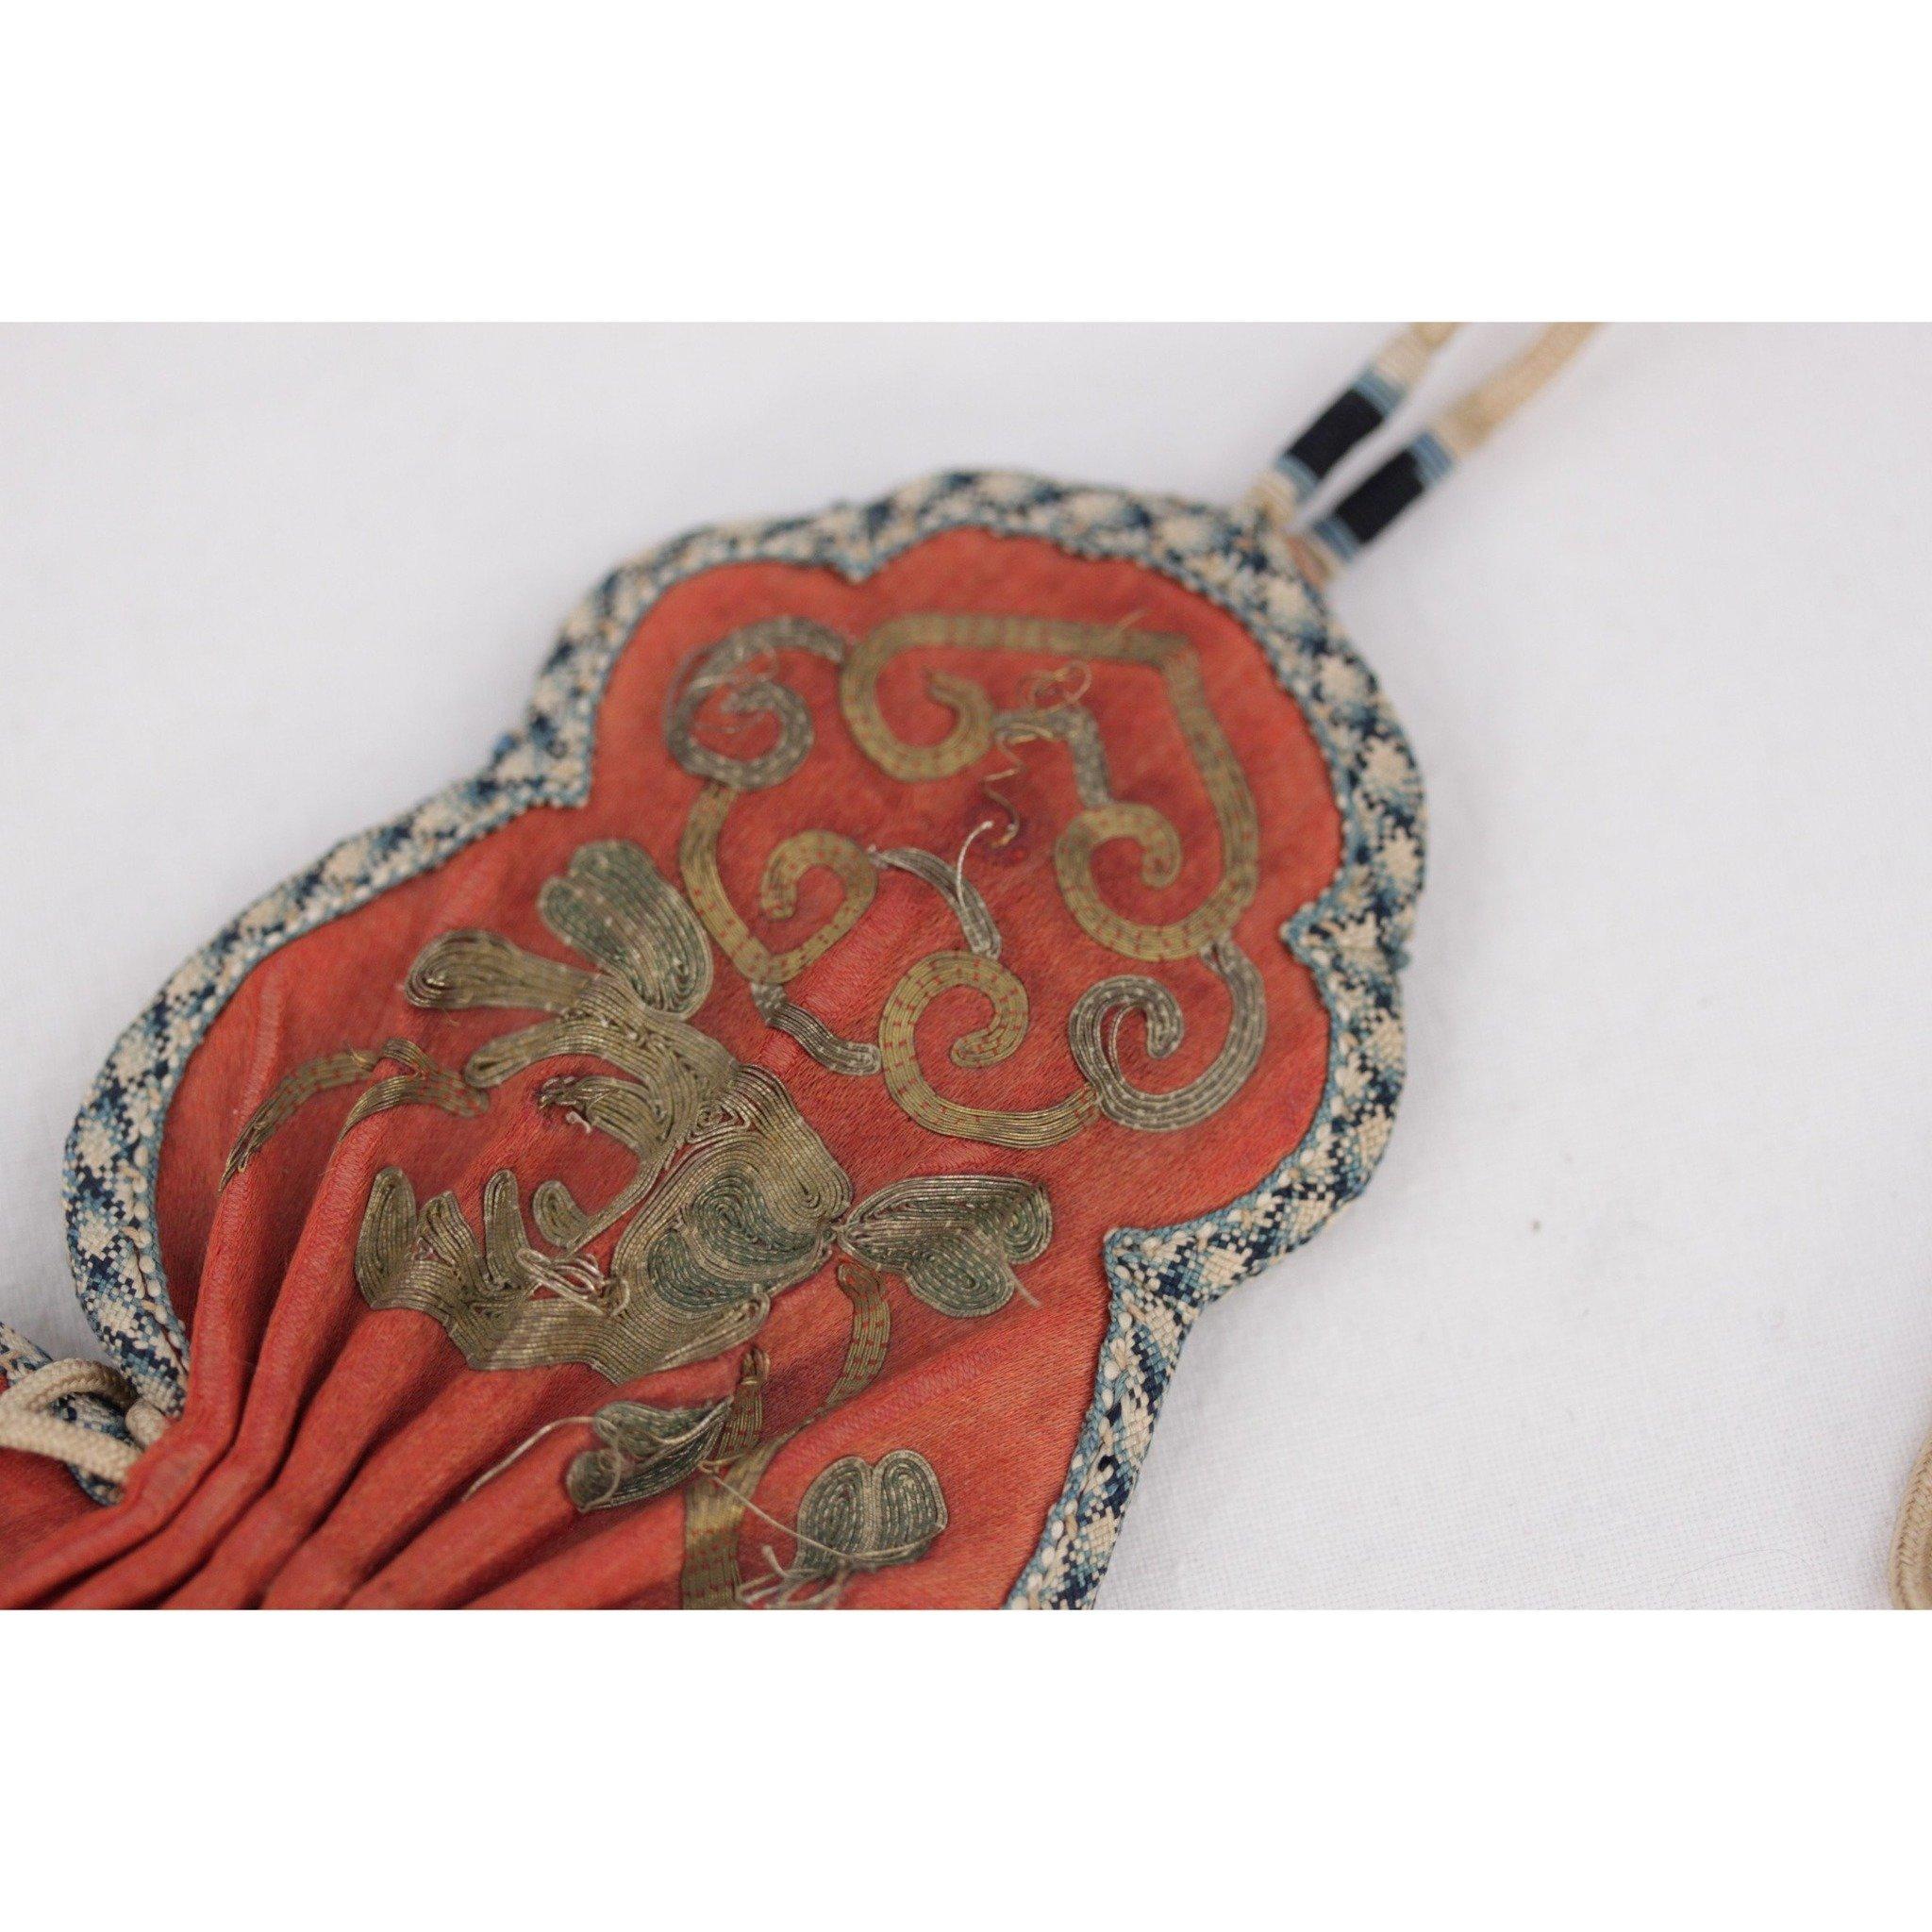  ANTIQUE CHINESE Vase Shape Embroidered Silk SCENT PURSE BAG 19th Century 4